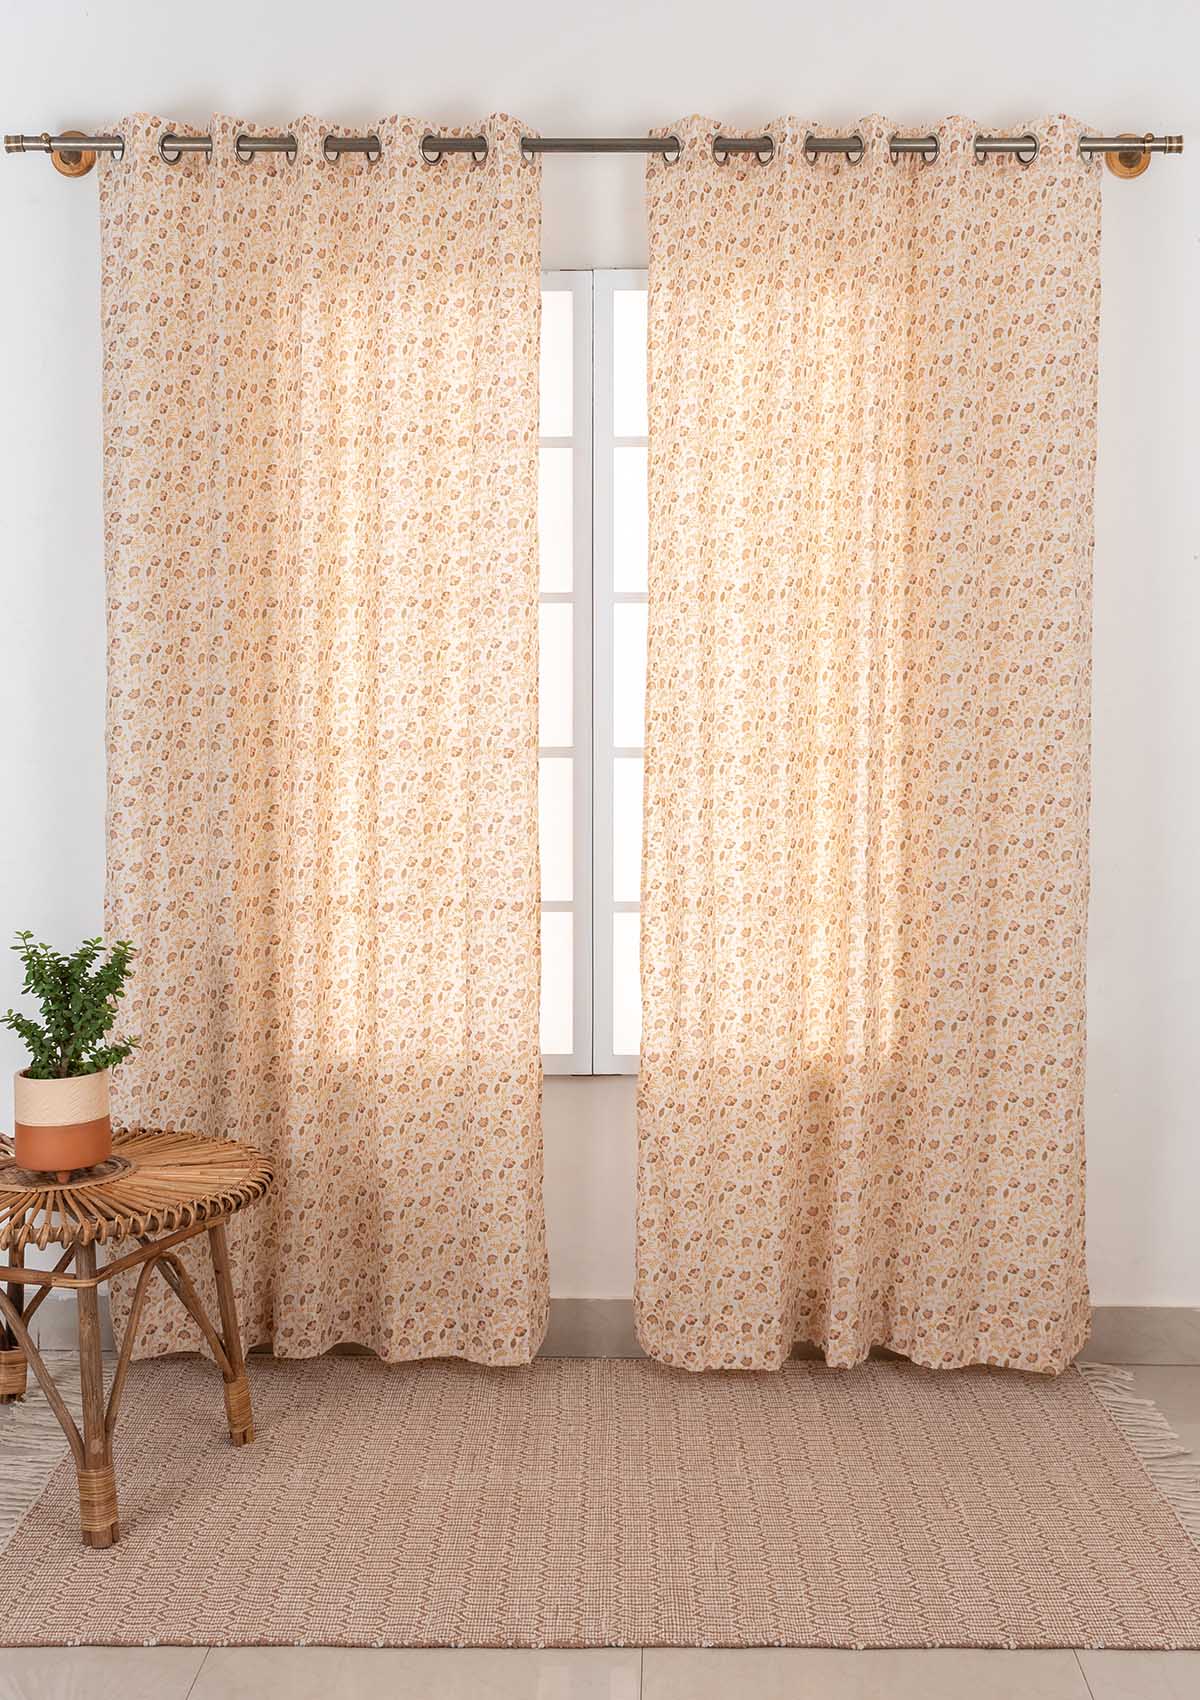 Calico 100% Customizable Cotton ethnic sheer curtain for living room - Light filtering - Amber